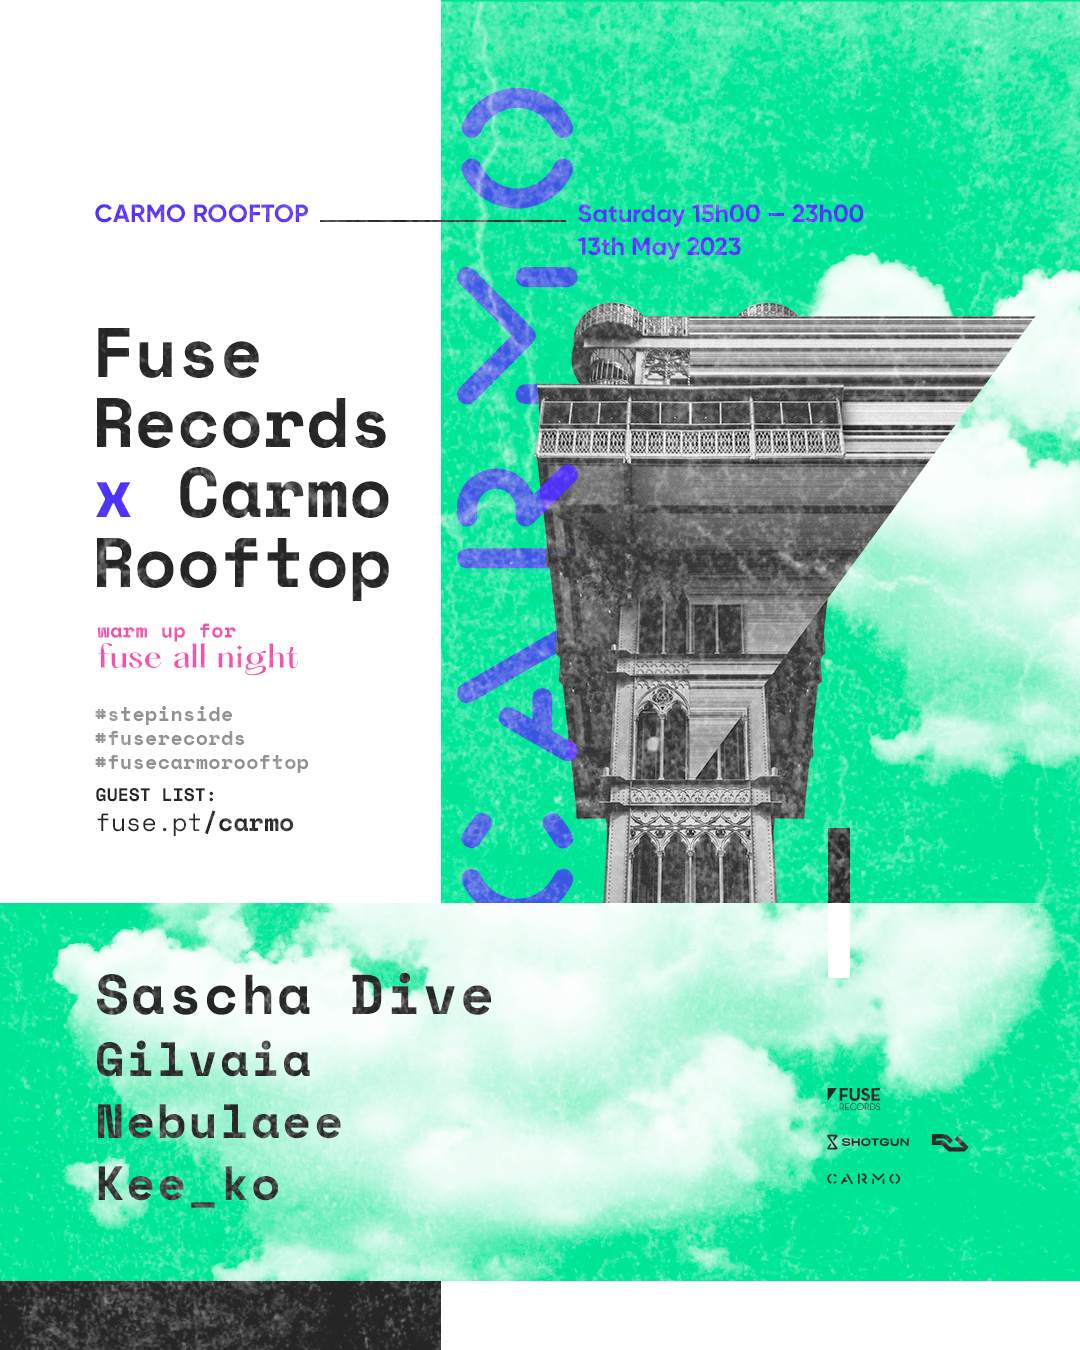 Fuse Records x Carmo Rooftop - フライヤー表